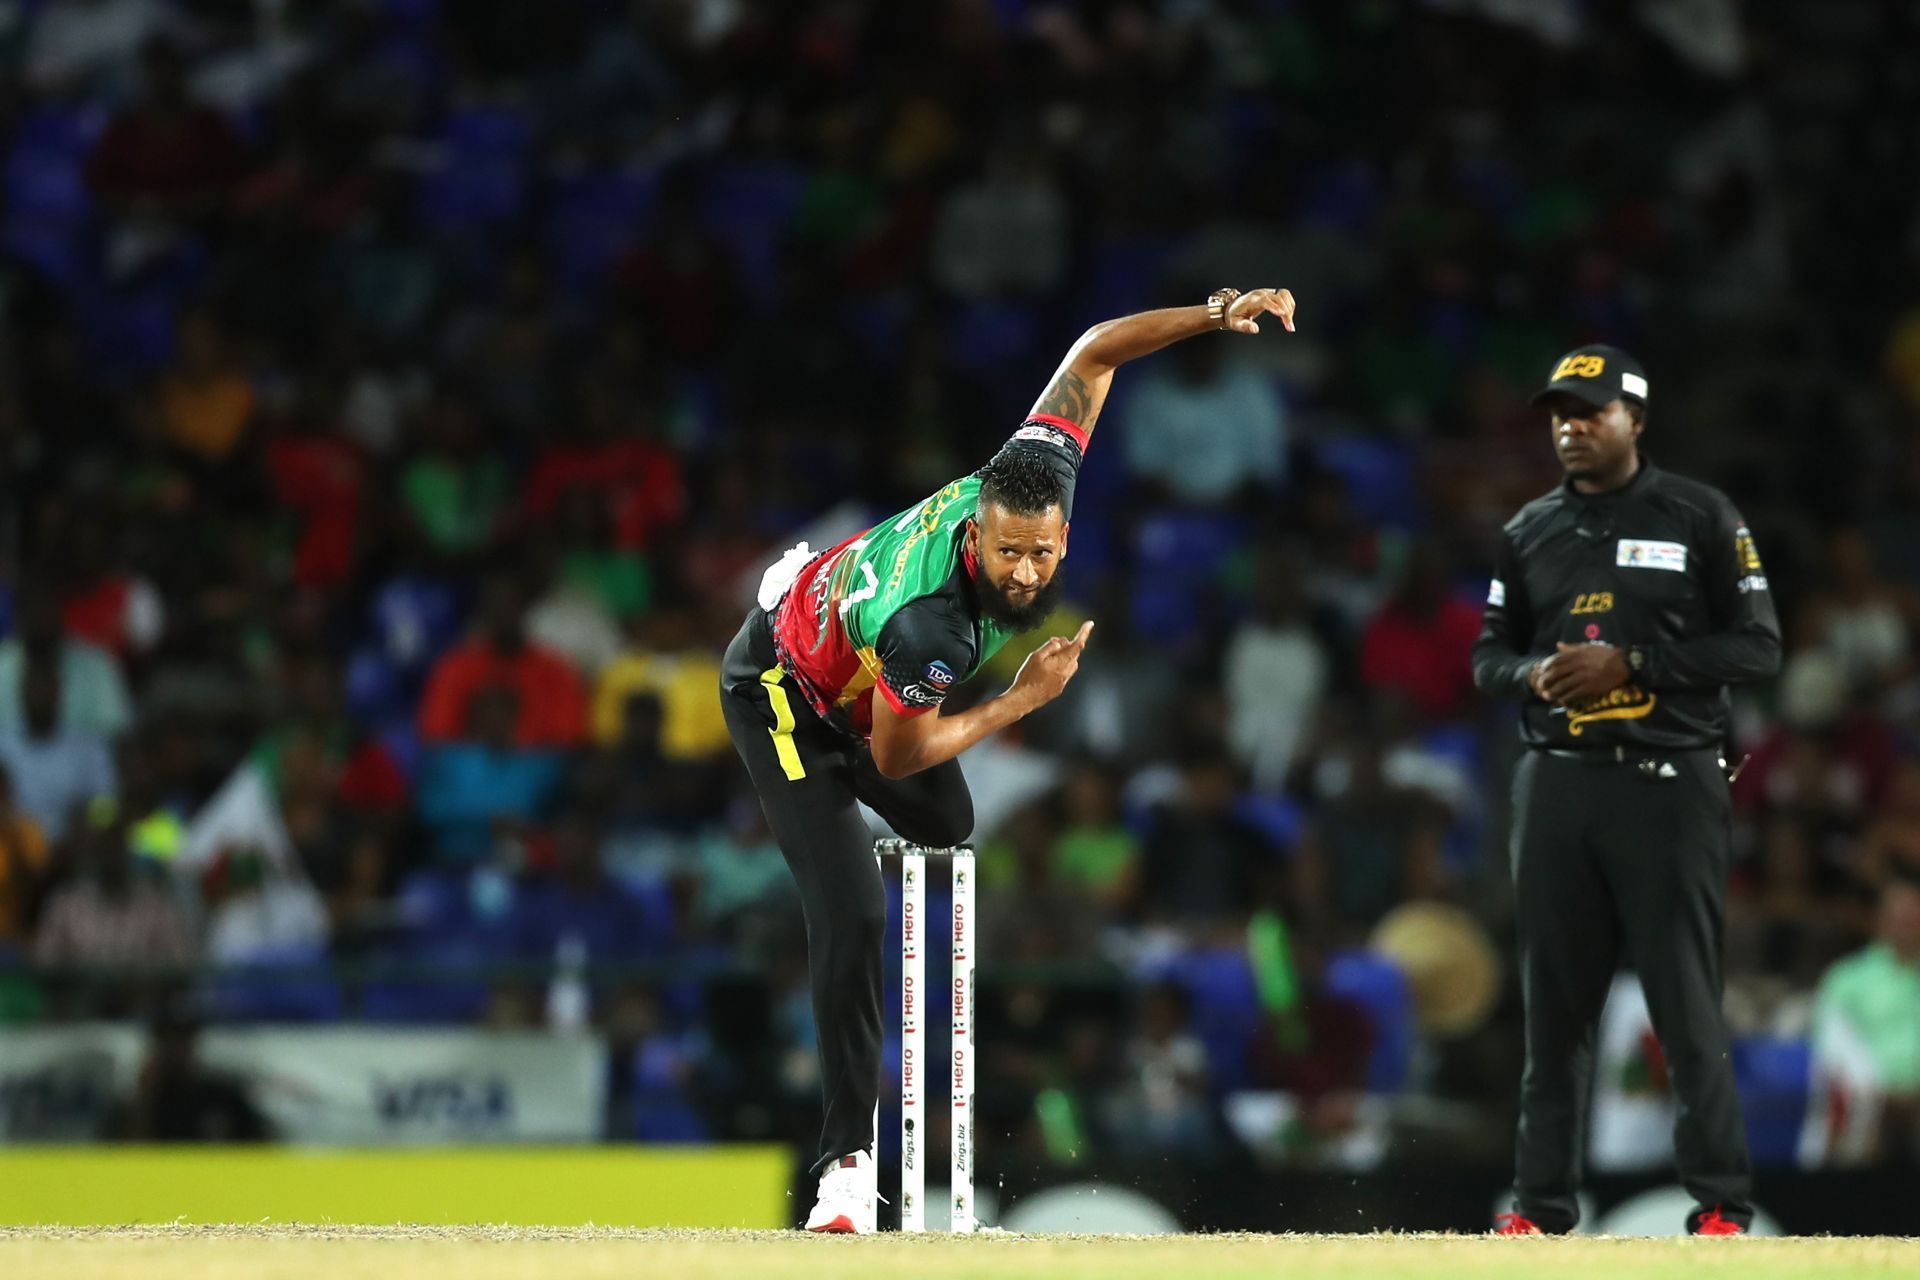 Rayad Emrit is a fast-bowling all-rounder from the West Indies (Image: Getty)